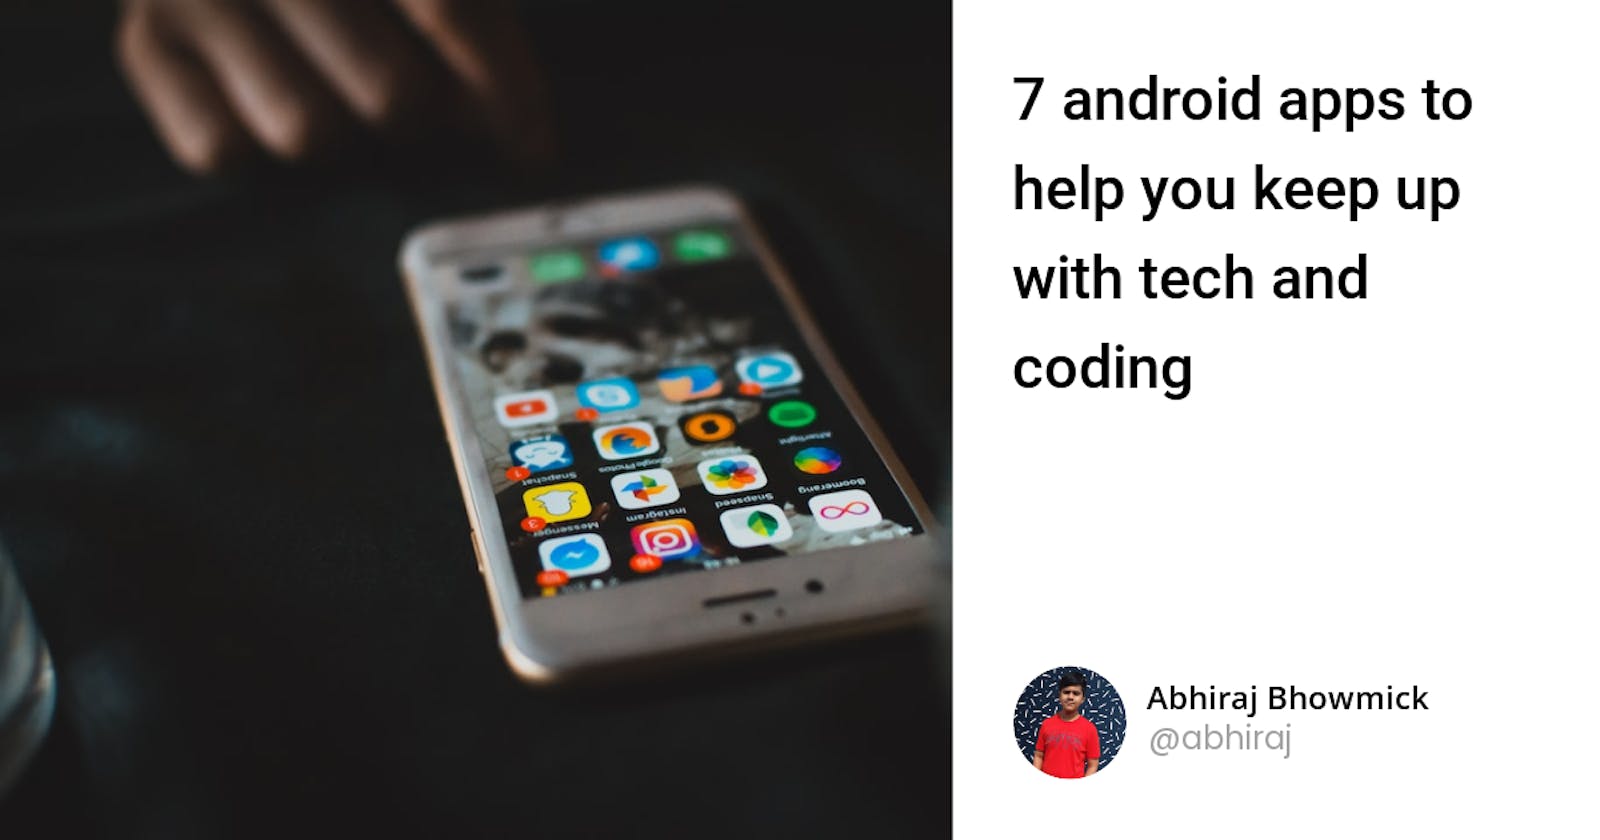 7 android apps to help you keep up with tech and coding